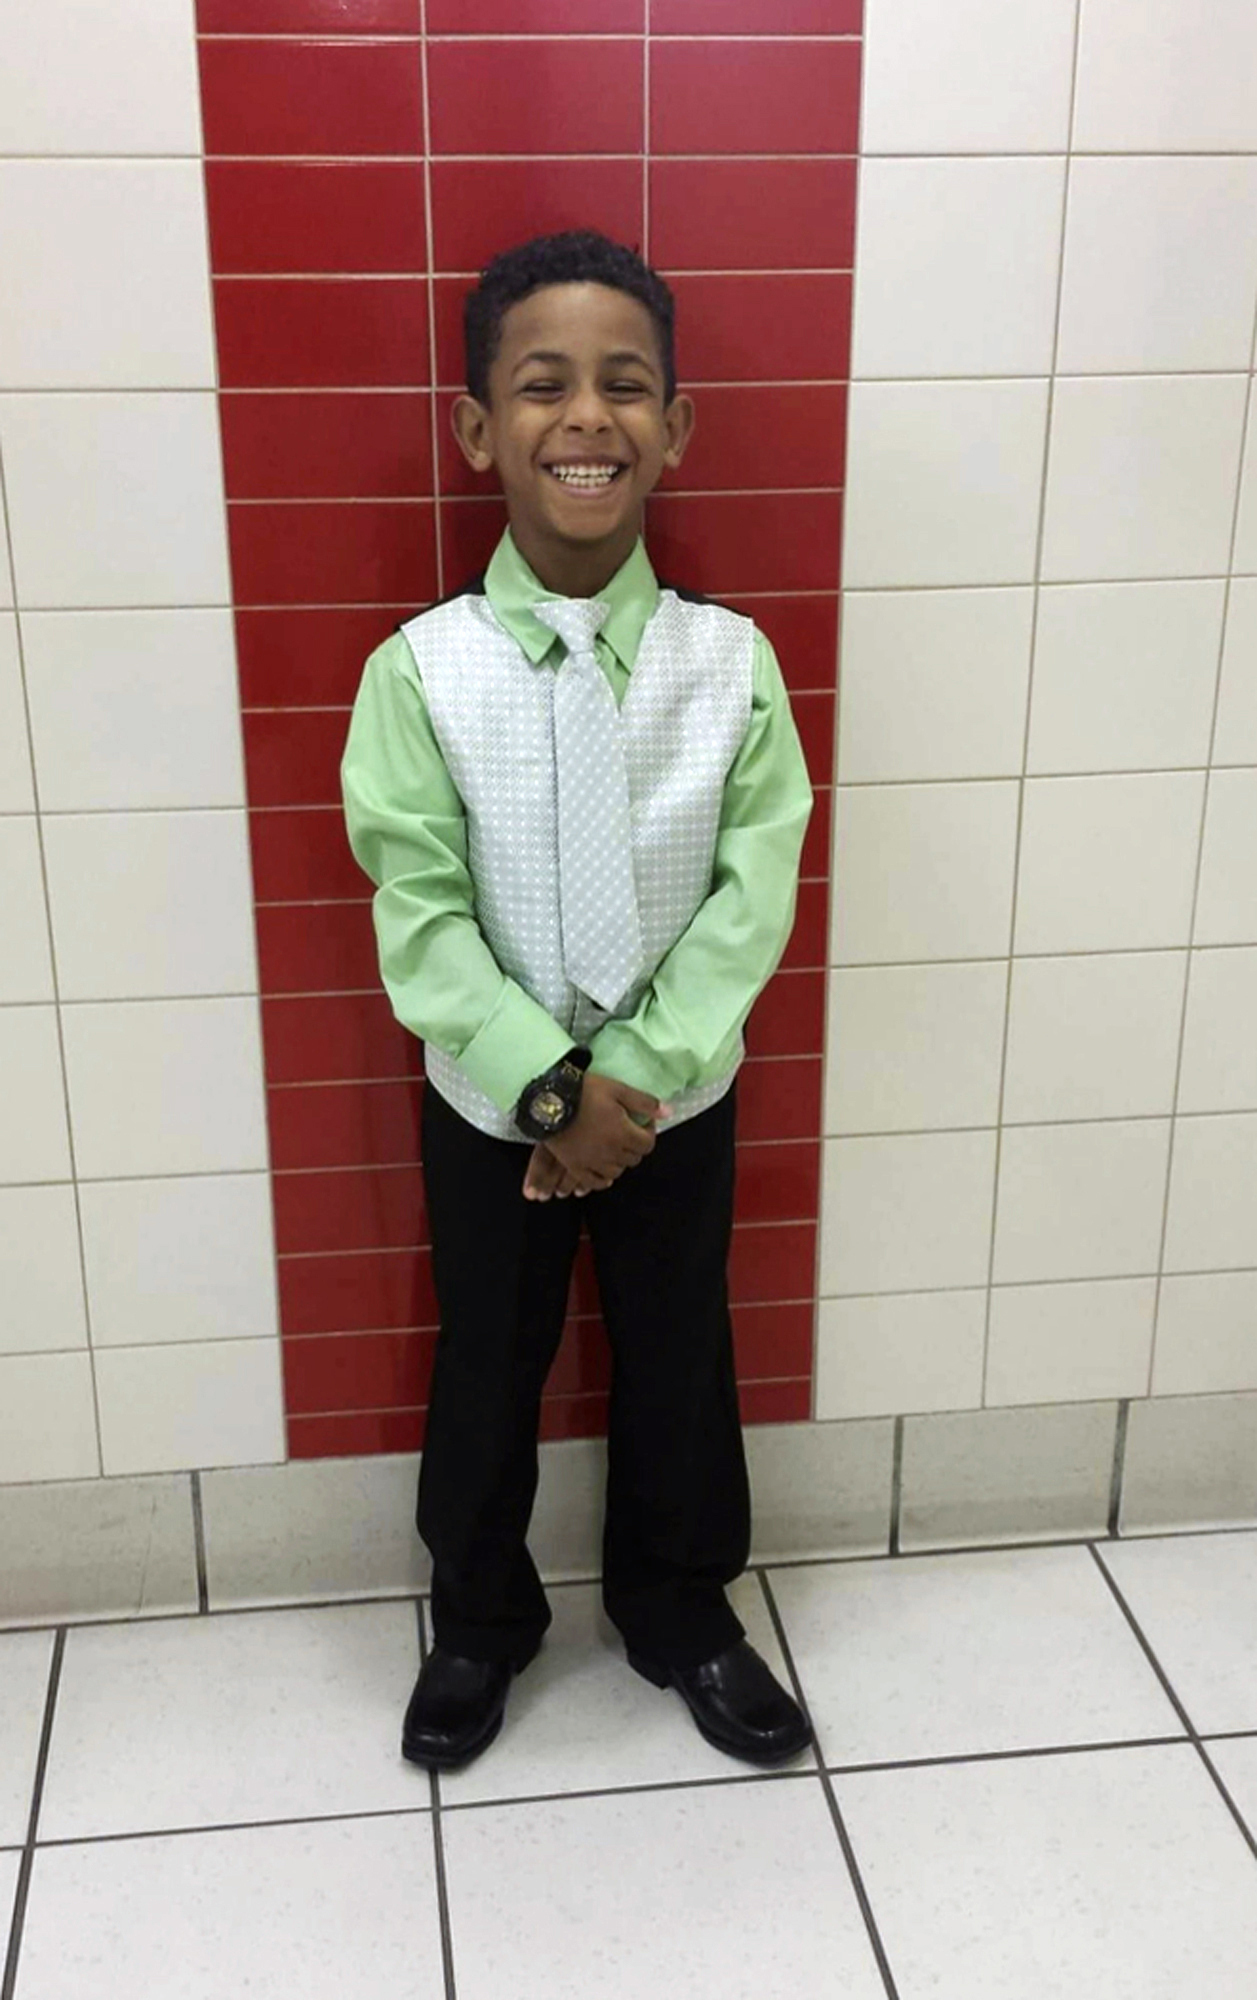 PHOTO: Gabriel Taye is pictured as a second grader in an image provided by his mother. The parents of the 8-year-old boy, who killed himself after being bullied repeatedly at an Ohio school, have reached a tentative $3 million settlement with his school.